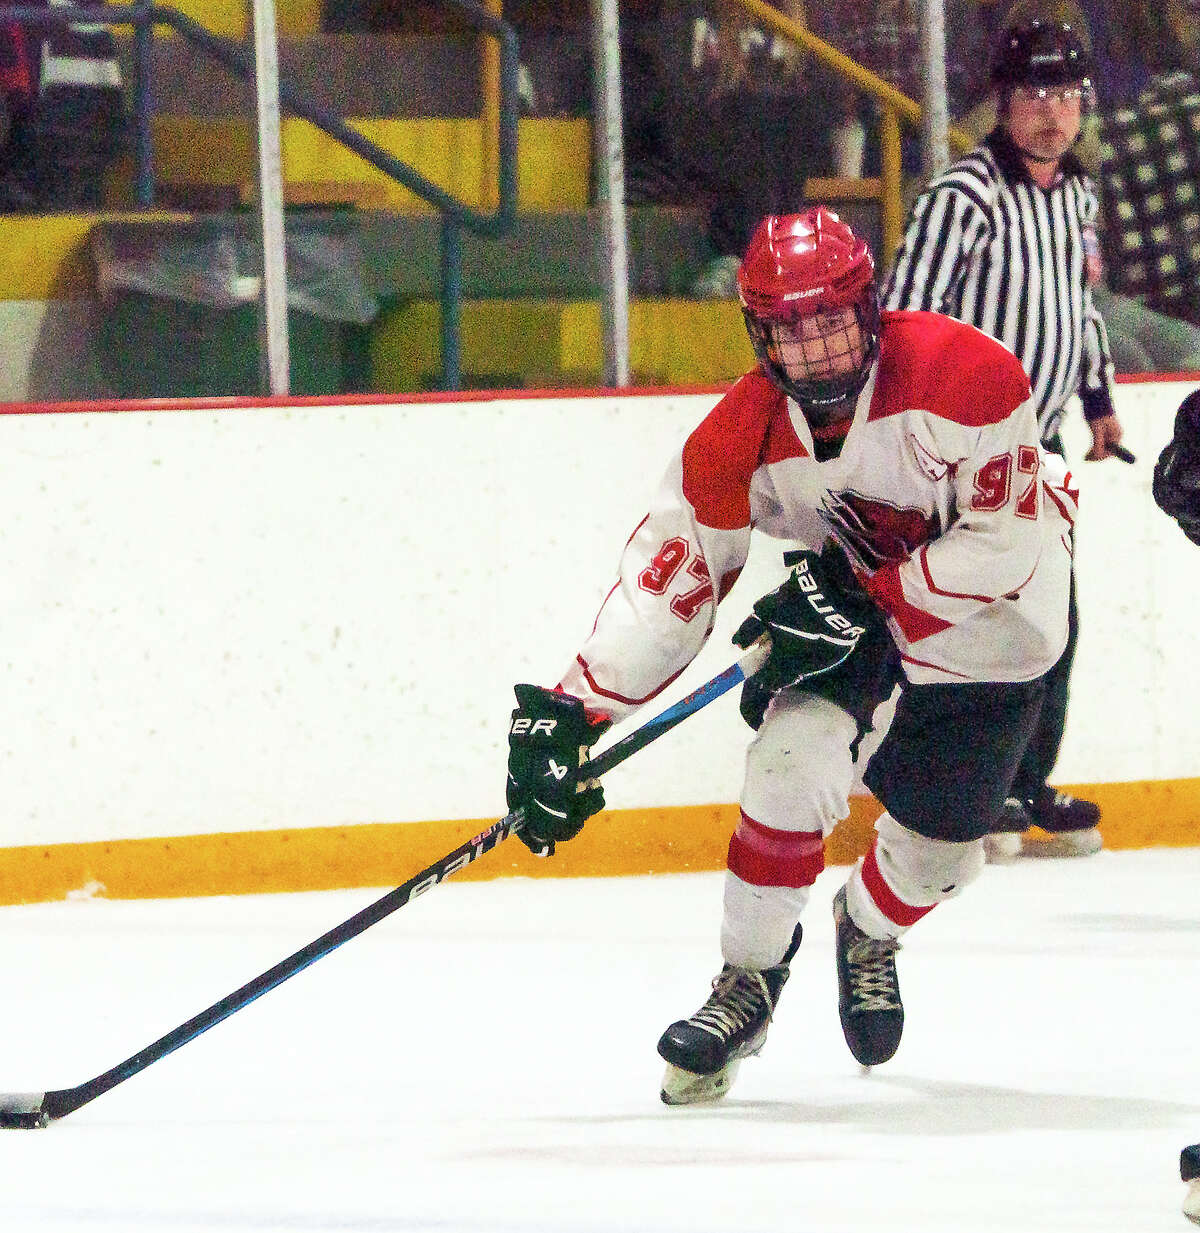 Colton Thompson of Alton scored a pair of goals in his team's 4-3 win over Vianney Thursday night in East Alton.